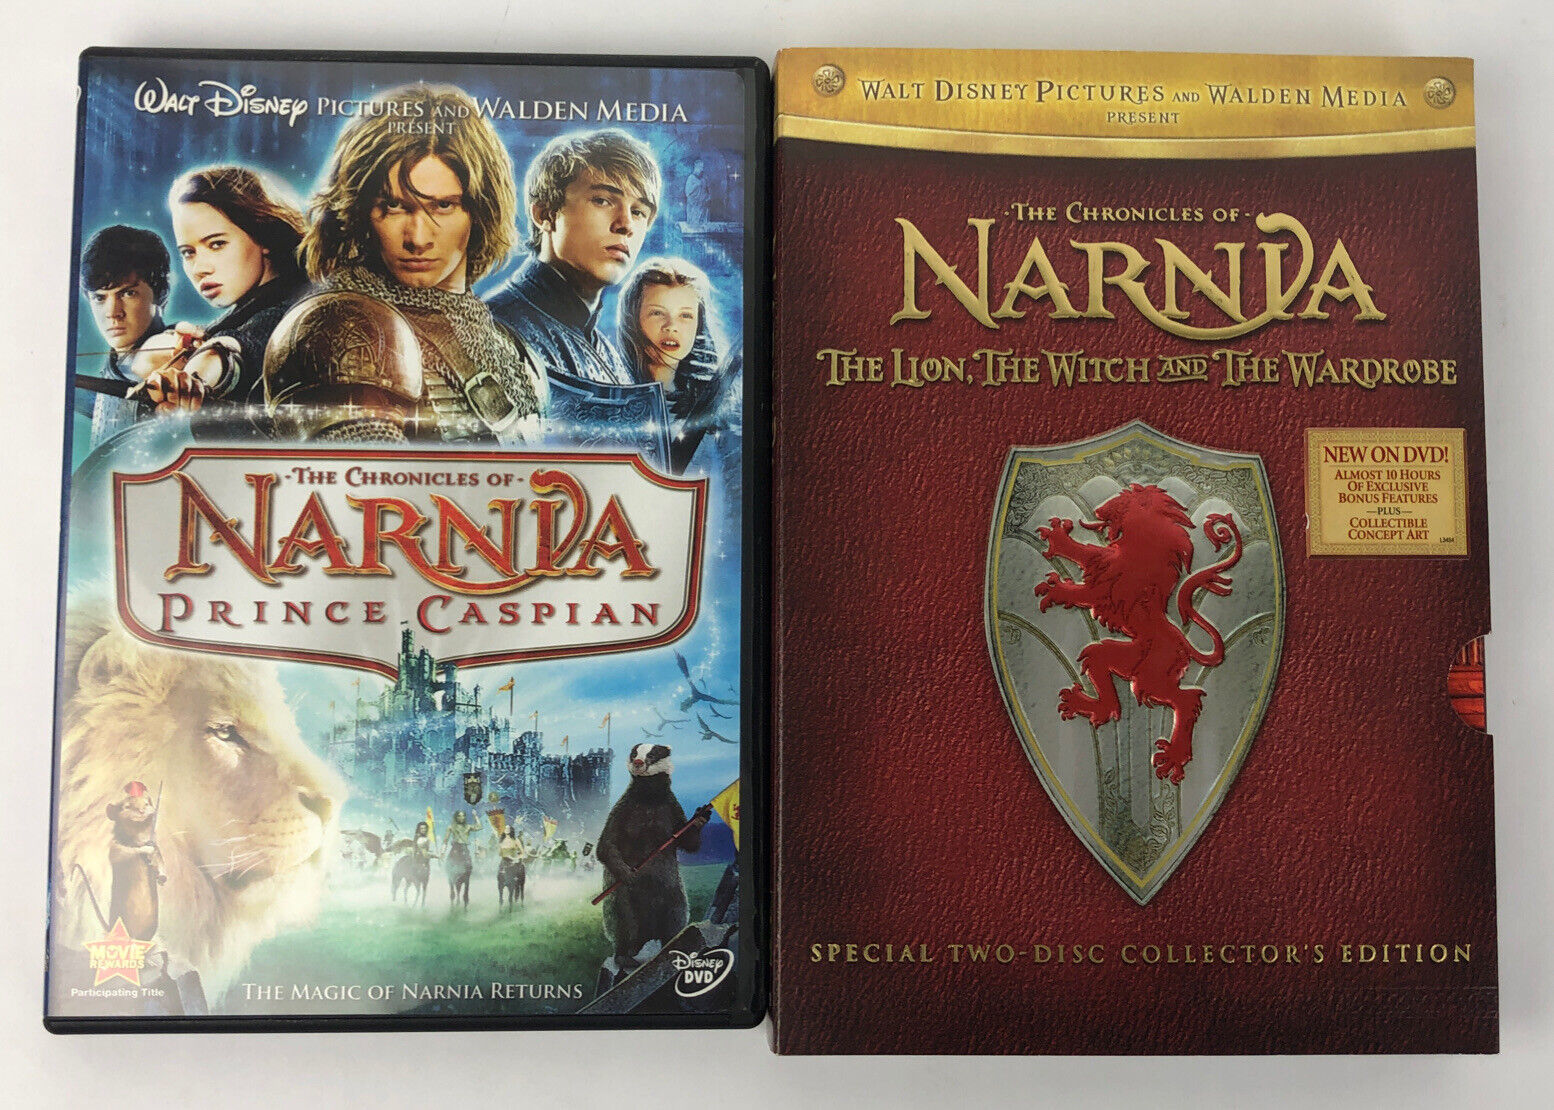 Primary image for The Lion, the Witch and the Wardrobe (DVD, 2-Disc Set) + Narnia Prince Caspian